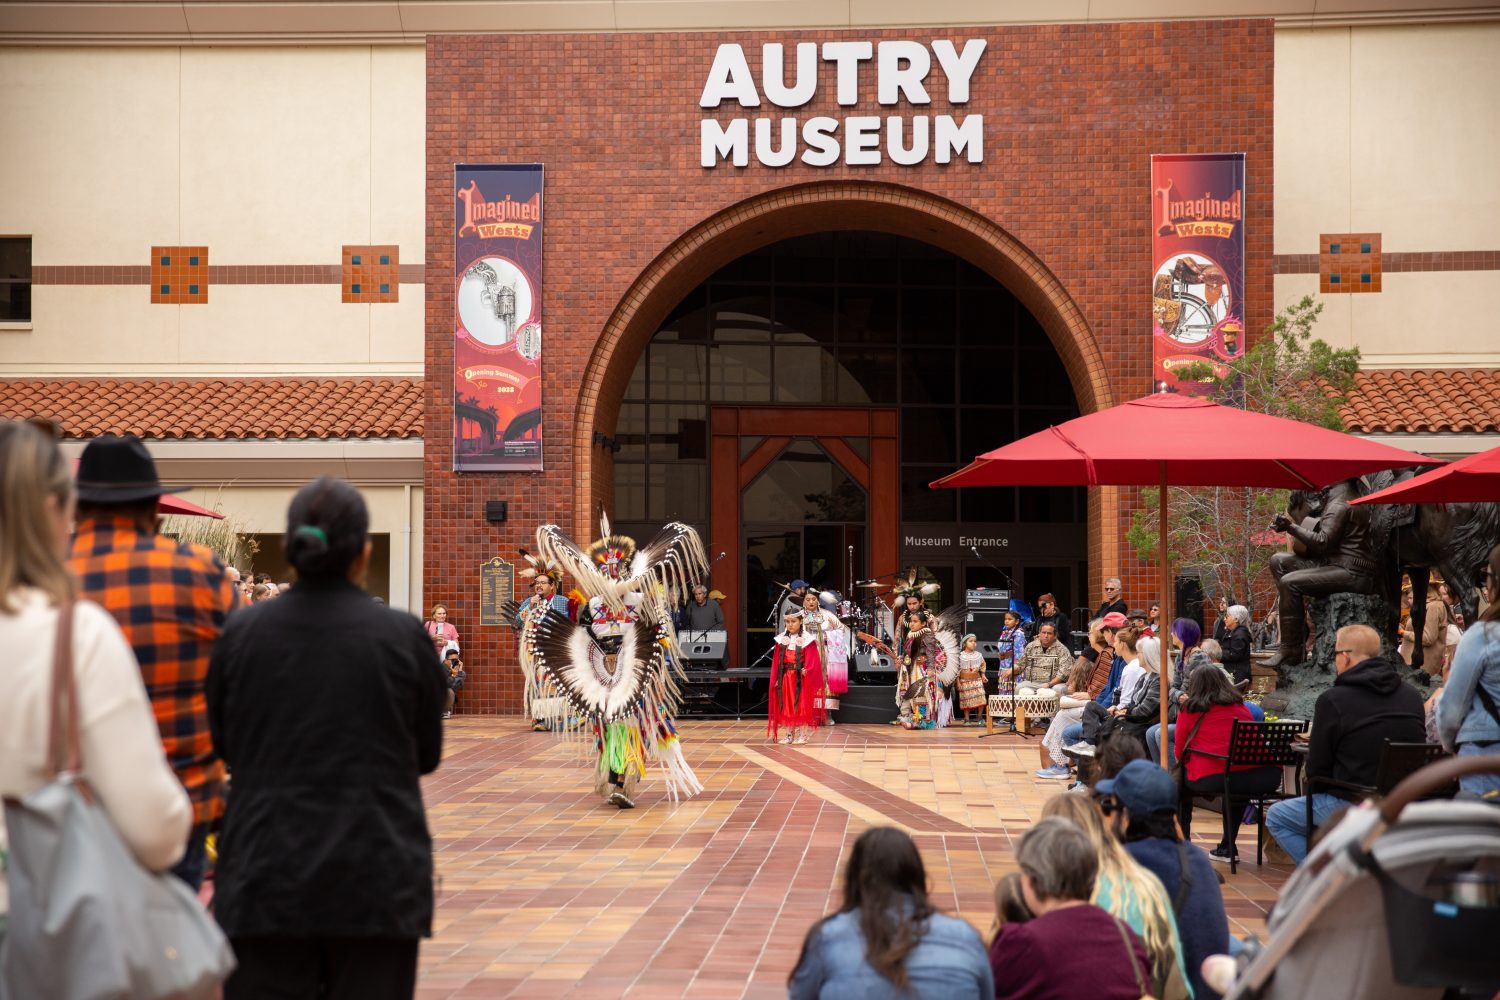 people sitting watching person in traditional native american dress perform outside museum entrance